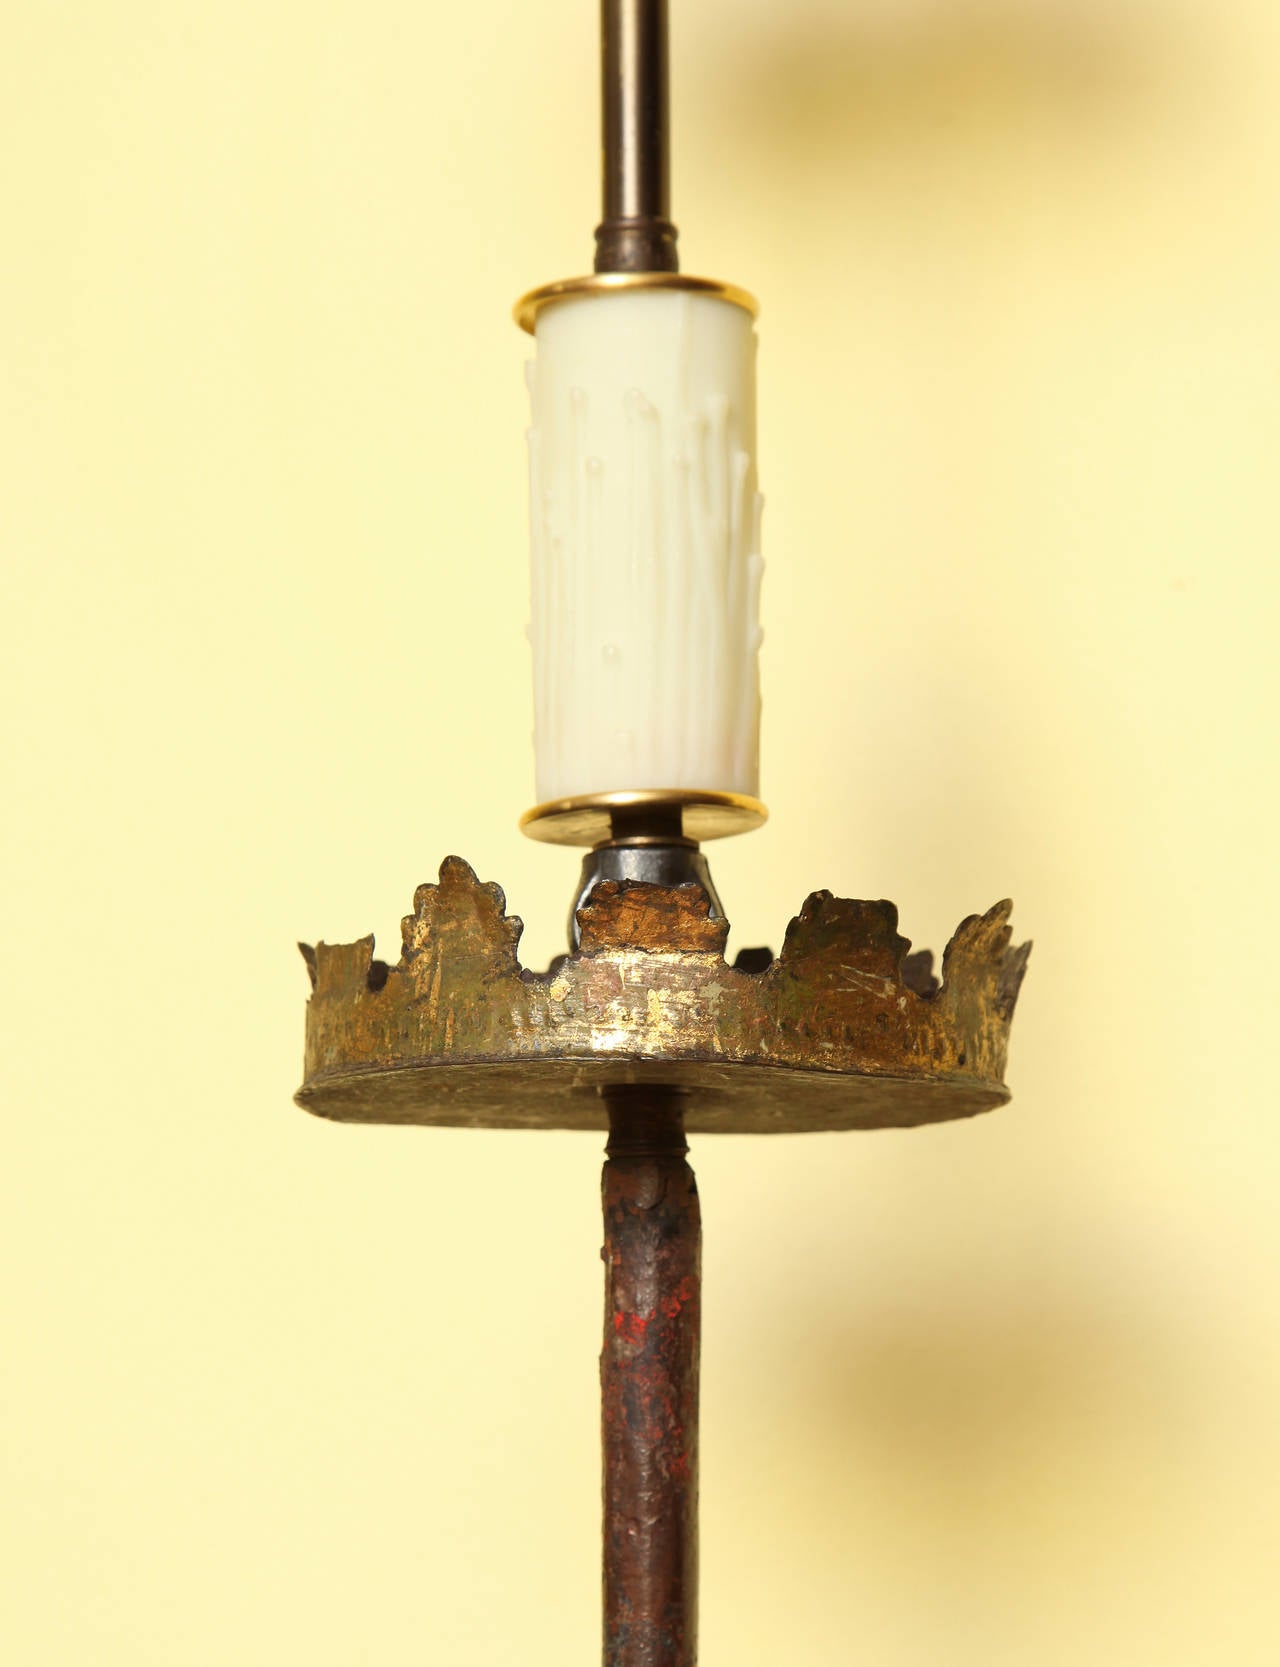 Baroque wrought iron torchere mounted as a floor lamp, having a knobbed round shaft with traces of polychrome paint and a gilt crown surmount, supported on three shaped downswept legs ending in penny feet. Now electrified, English or continental,